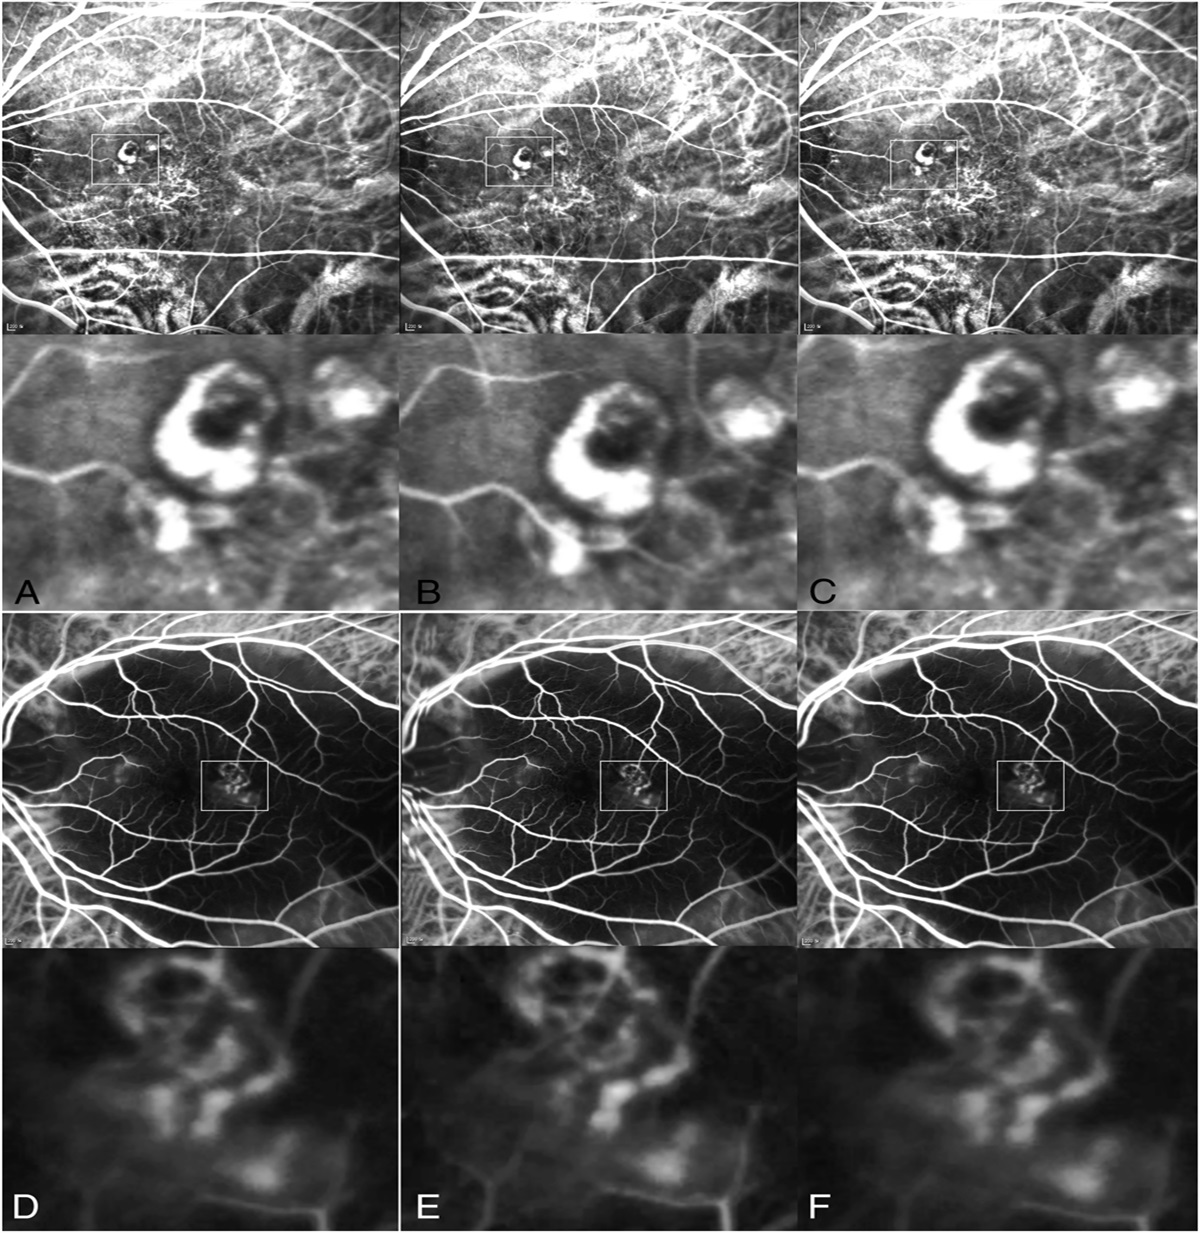 IMAGING AND CLINICAL FEATURES OF PULSATILE POLYPOIDAL CHOROIDAL VASCULOPATHY